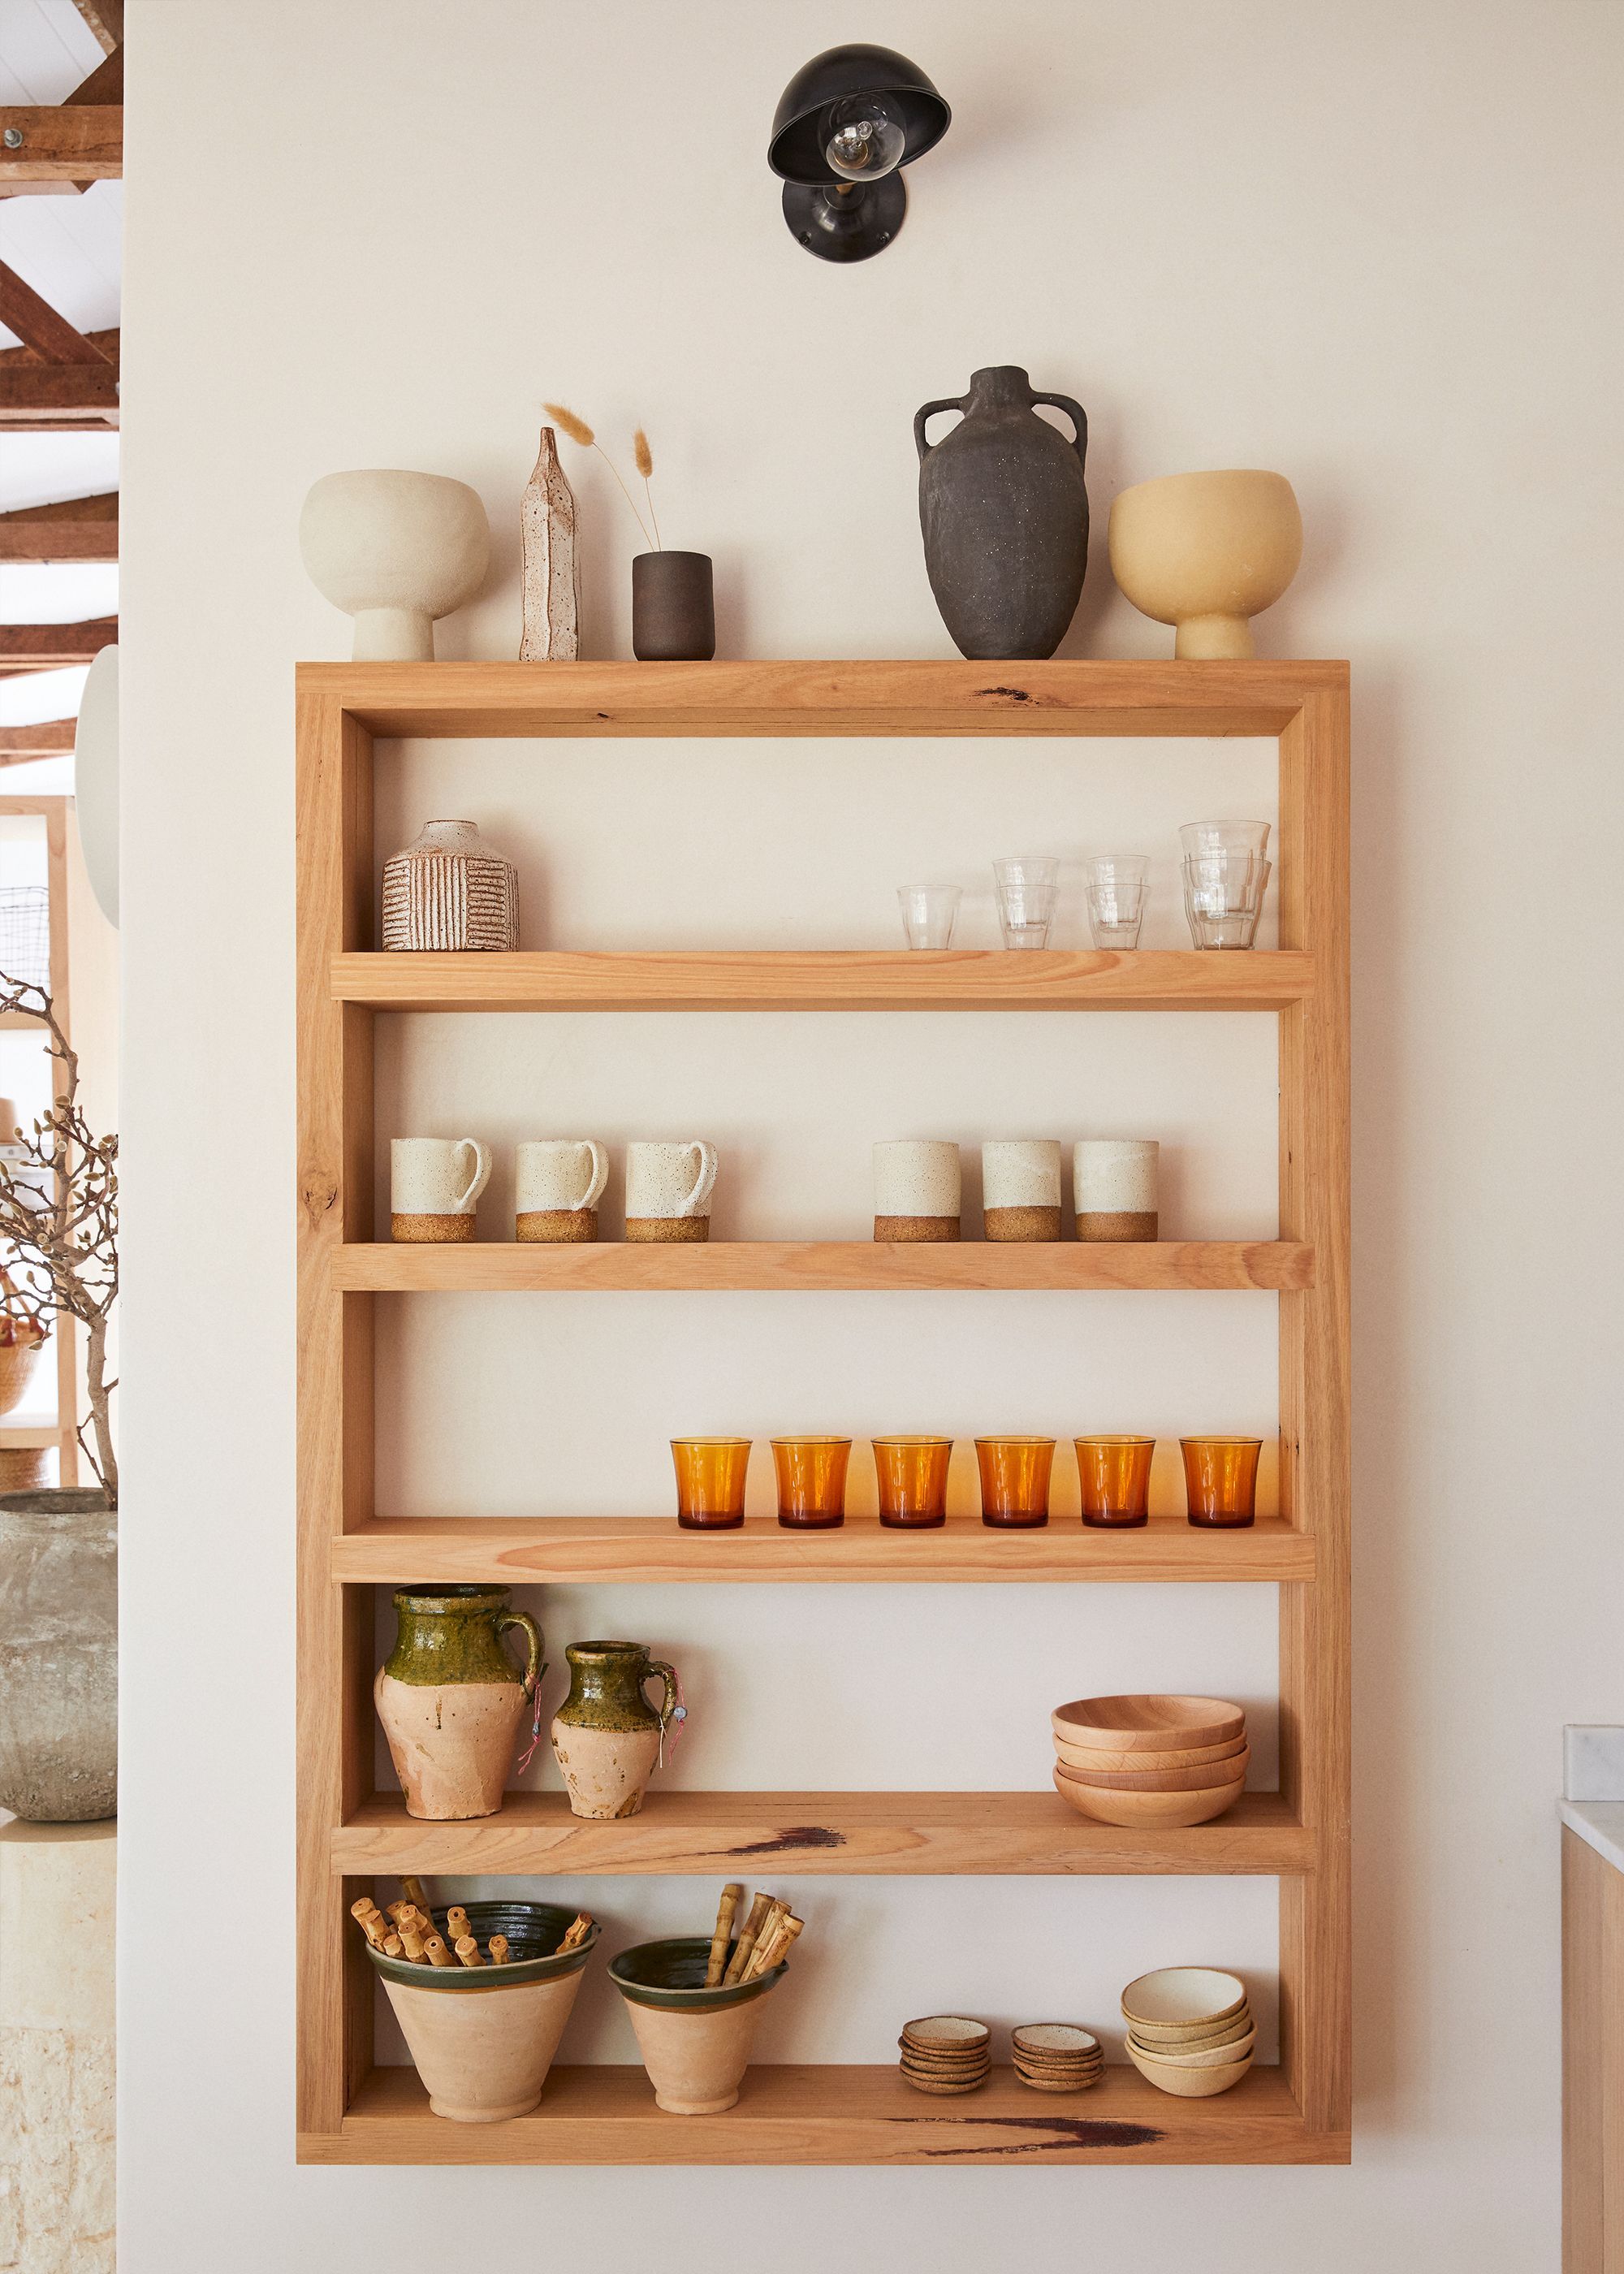 Tidy Your Home With Our Home Storage Hacks